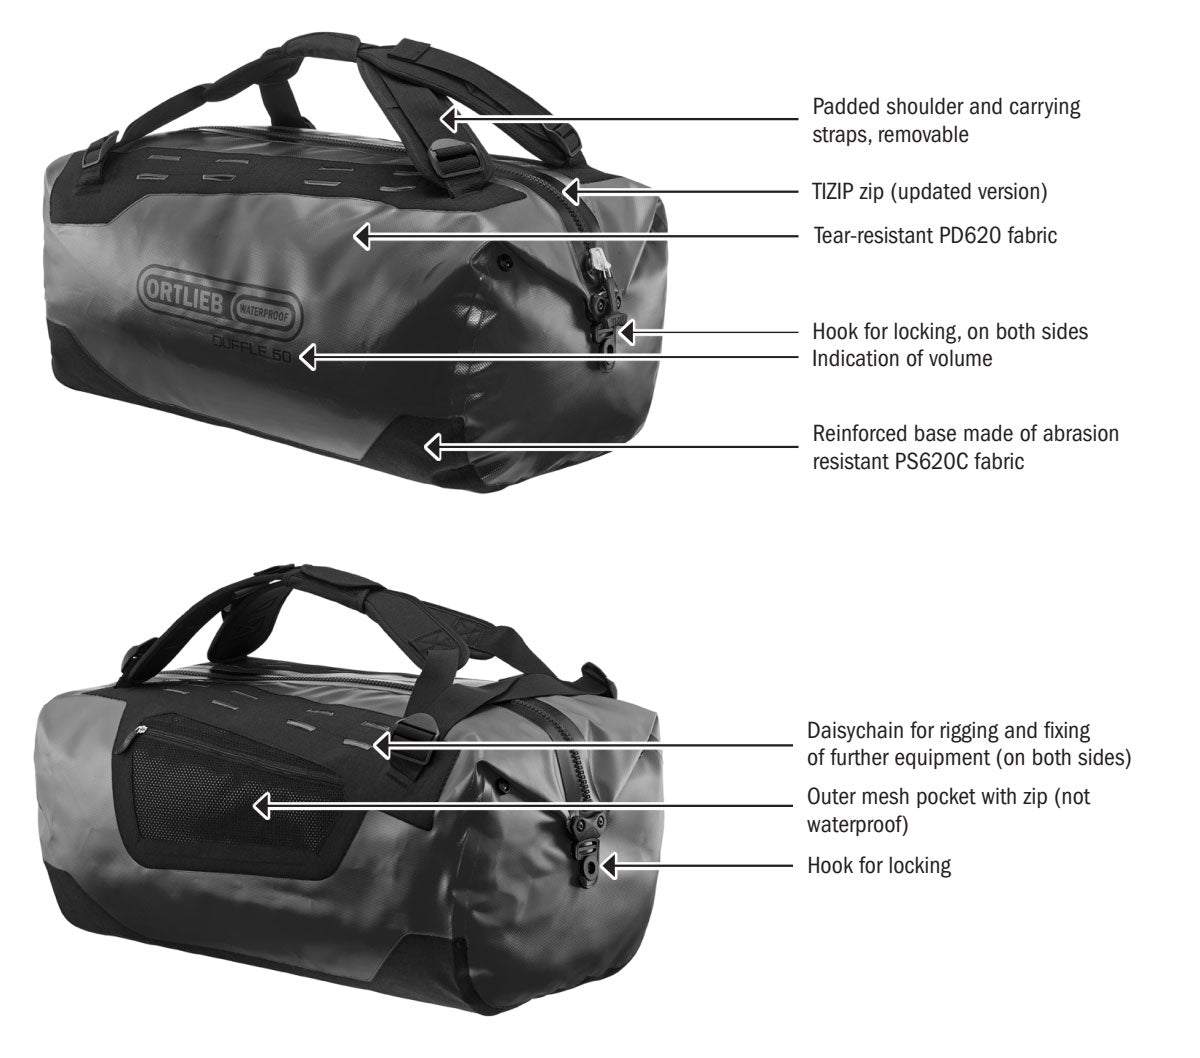 ORTLIEB Duffle Overview